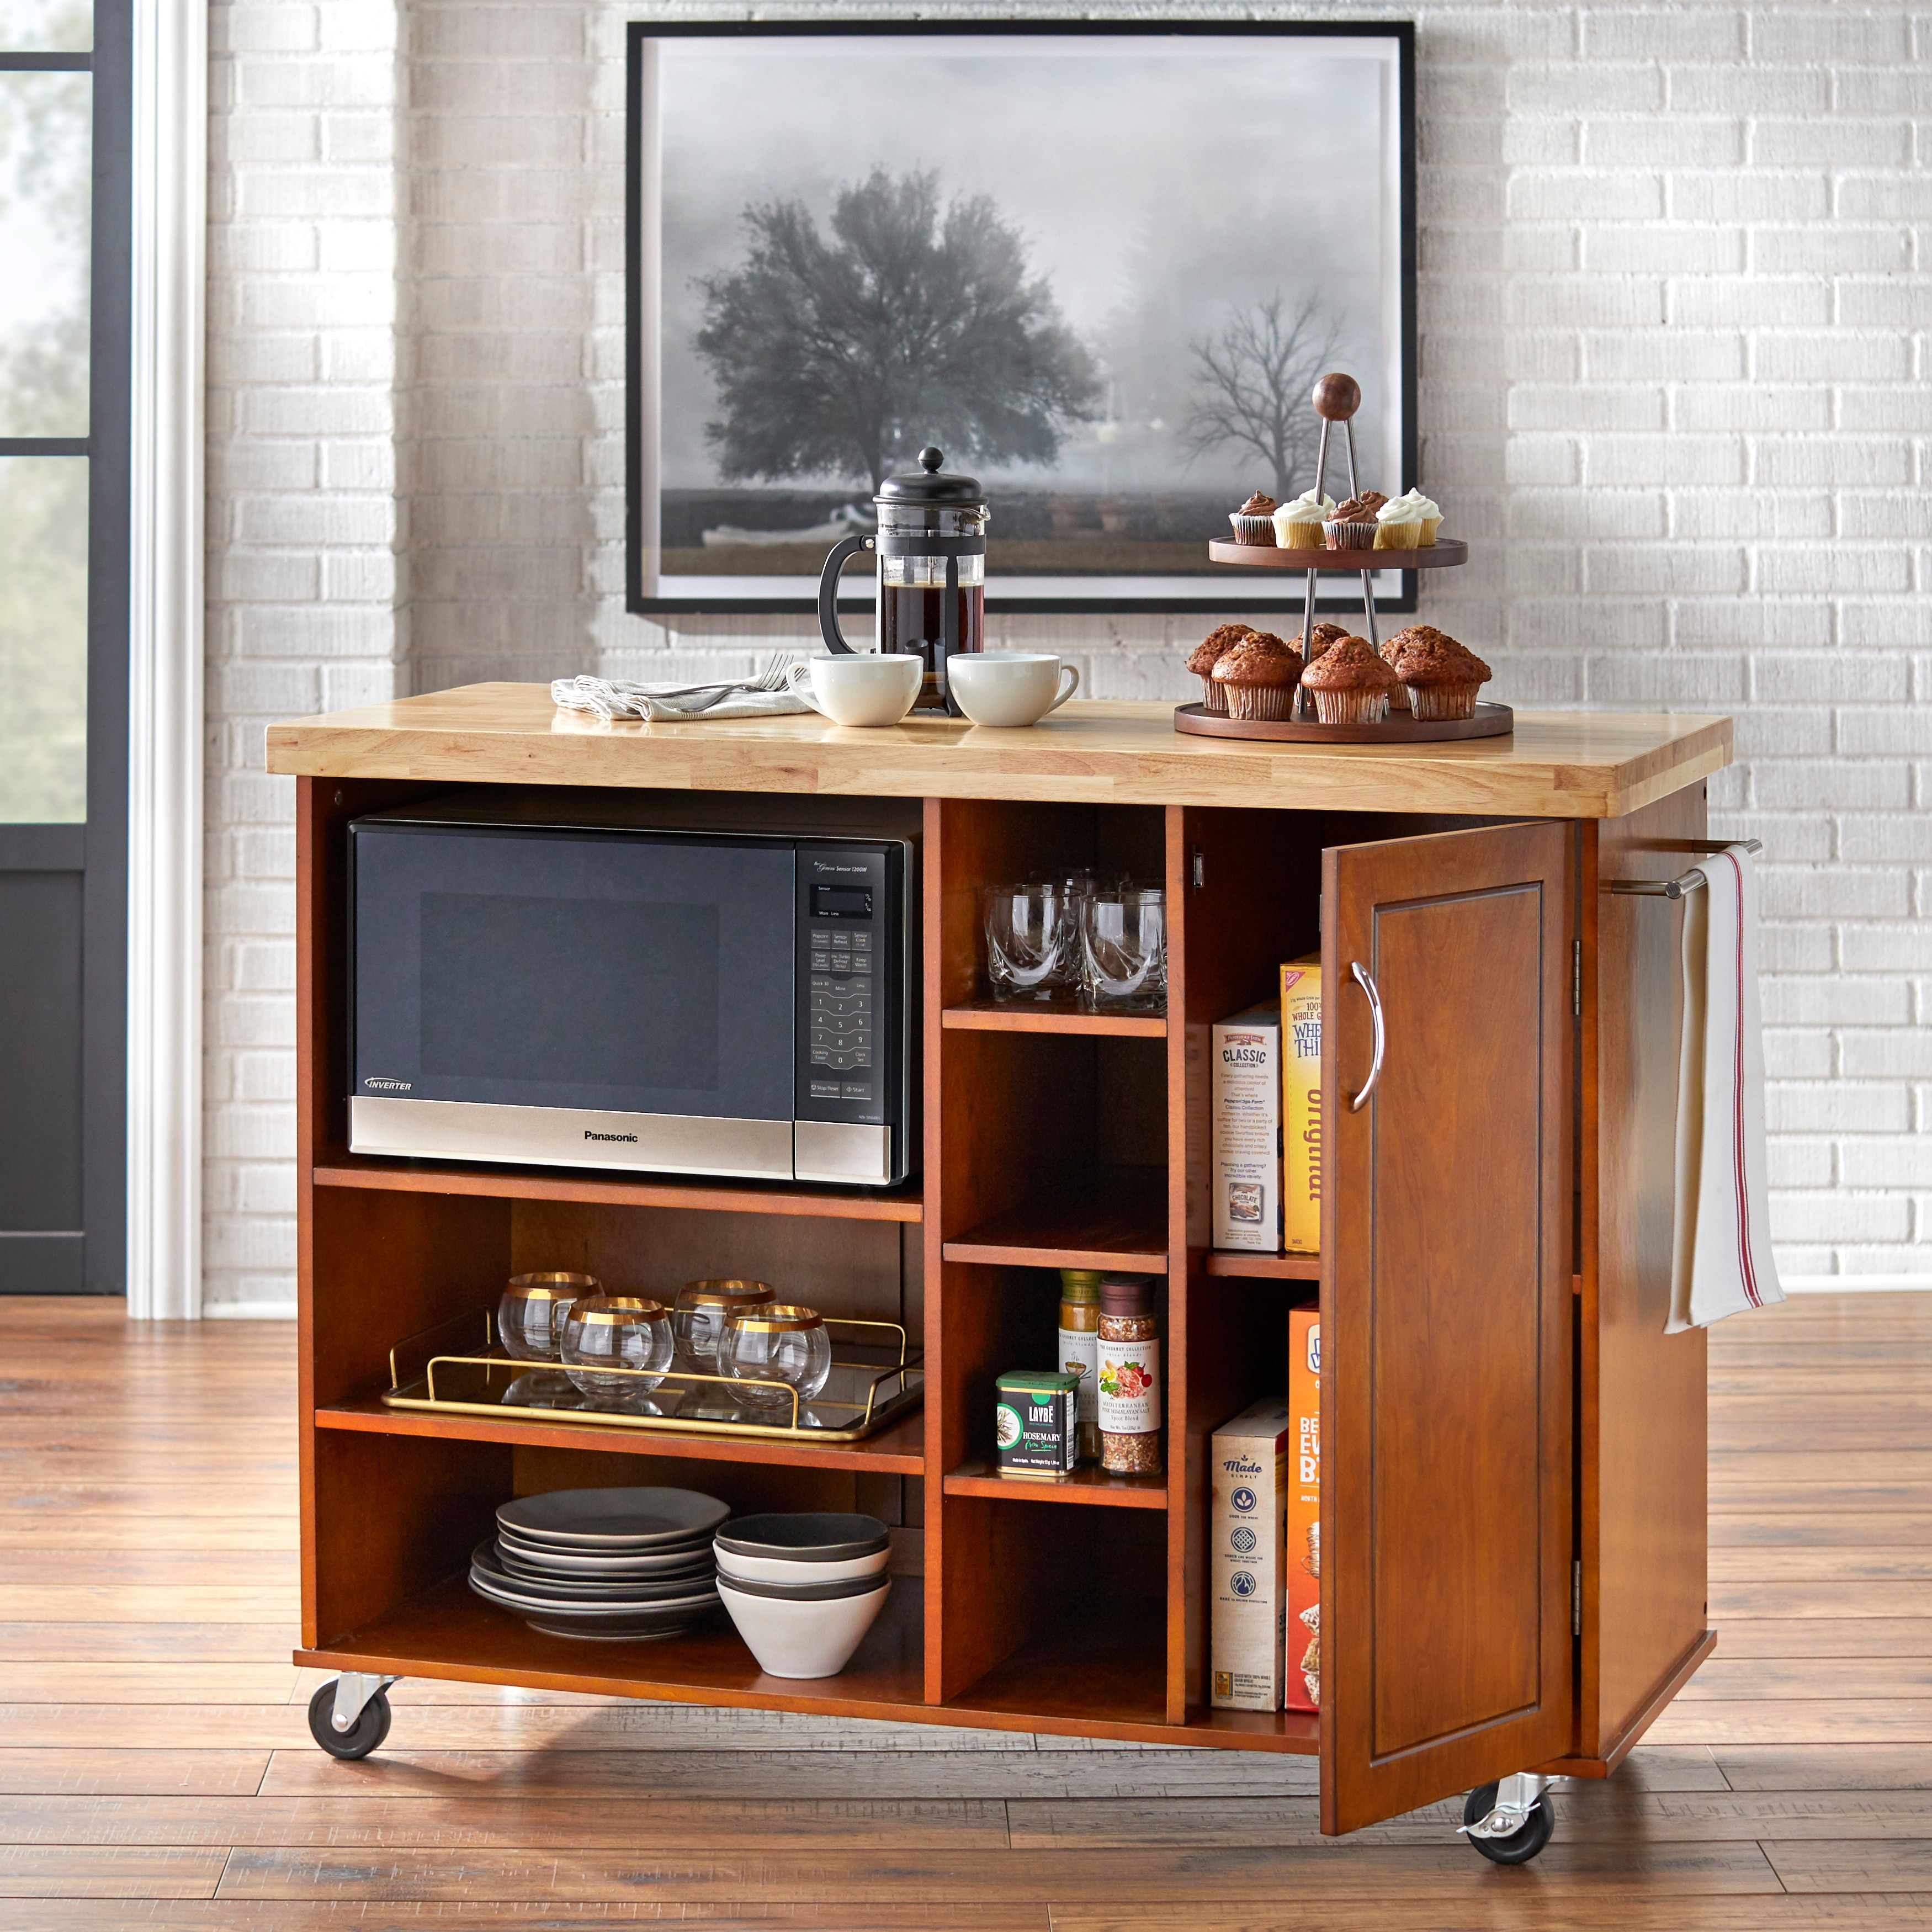 TMS Galvin Butcher Block Rolling Kitchen Cart with Microwave Cabinet, Shelves, and Towel Rack, Walnut - image 2 of 7